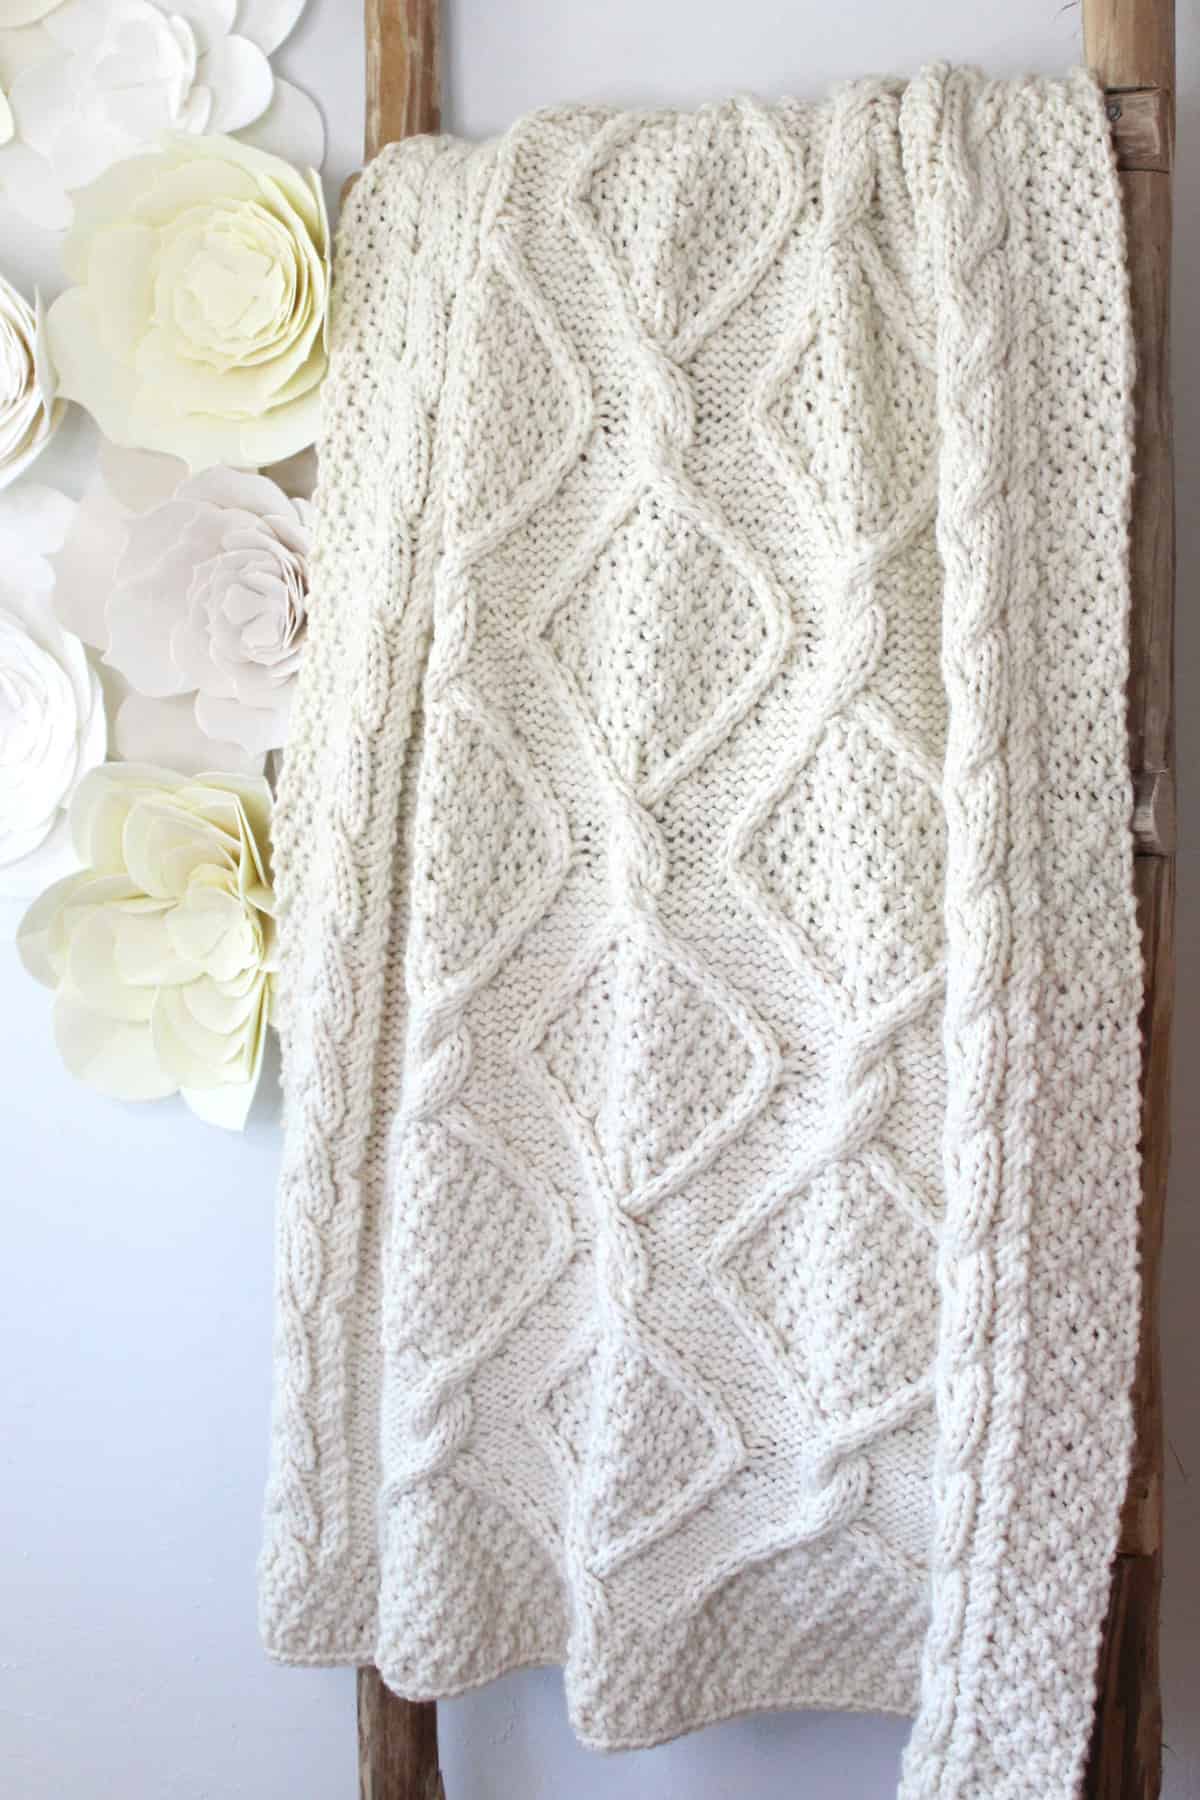 Cable knit blanket throw hung on a wooden ladder in cream colored yarn.